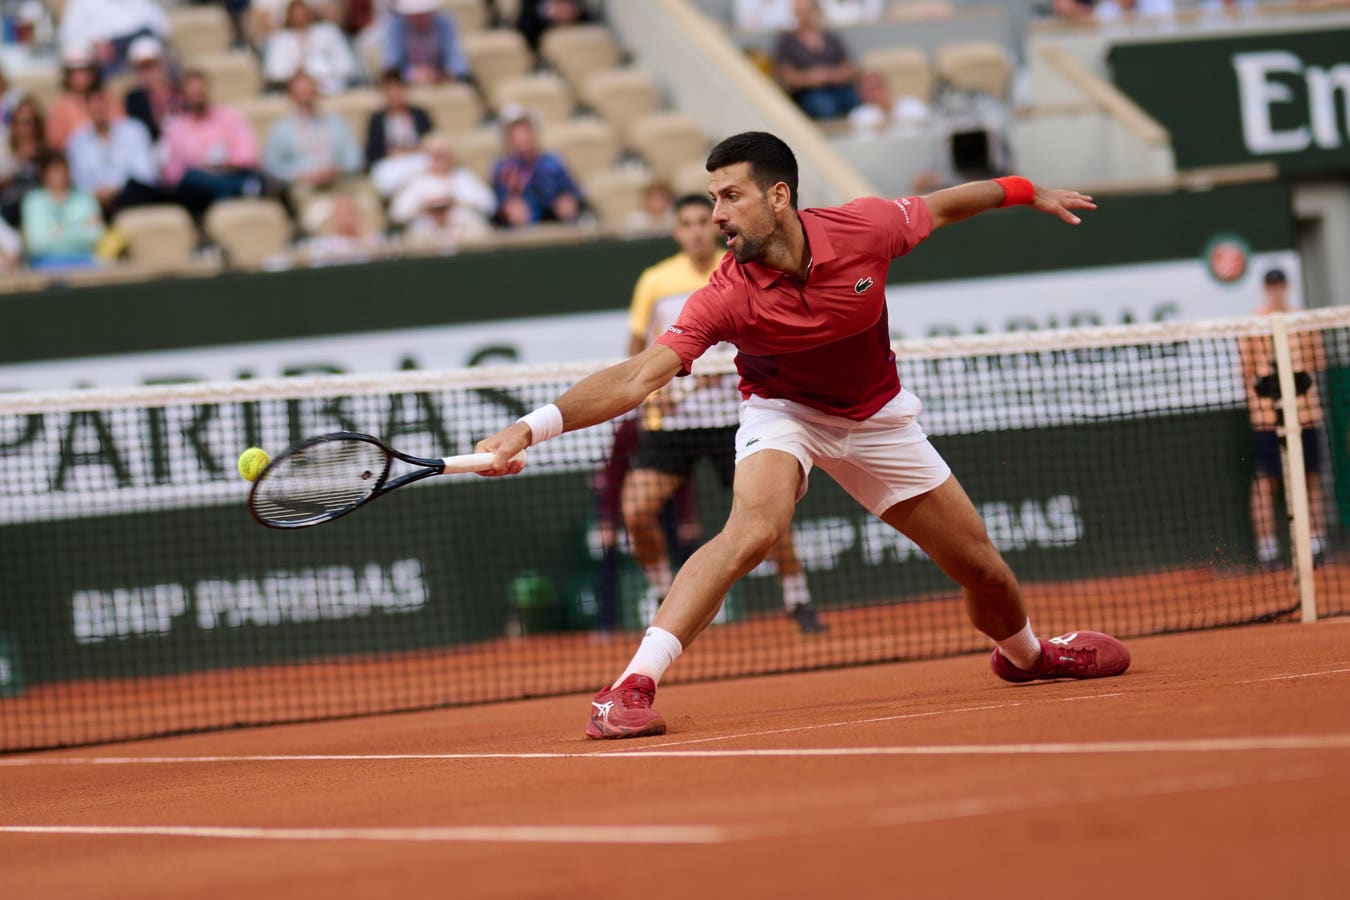 Novak Djokovic tears right medial meniscus and withdraws from French Open